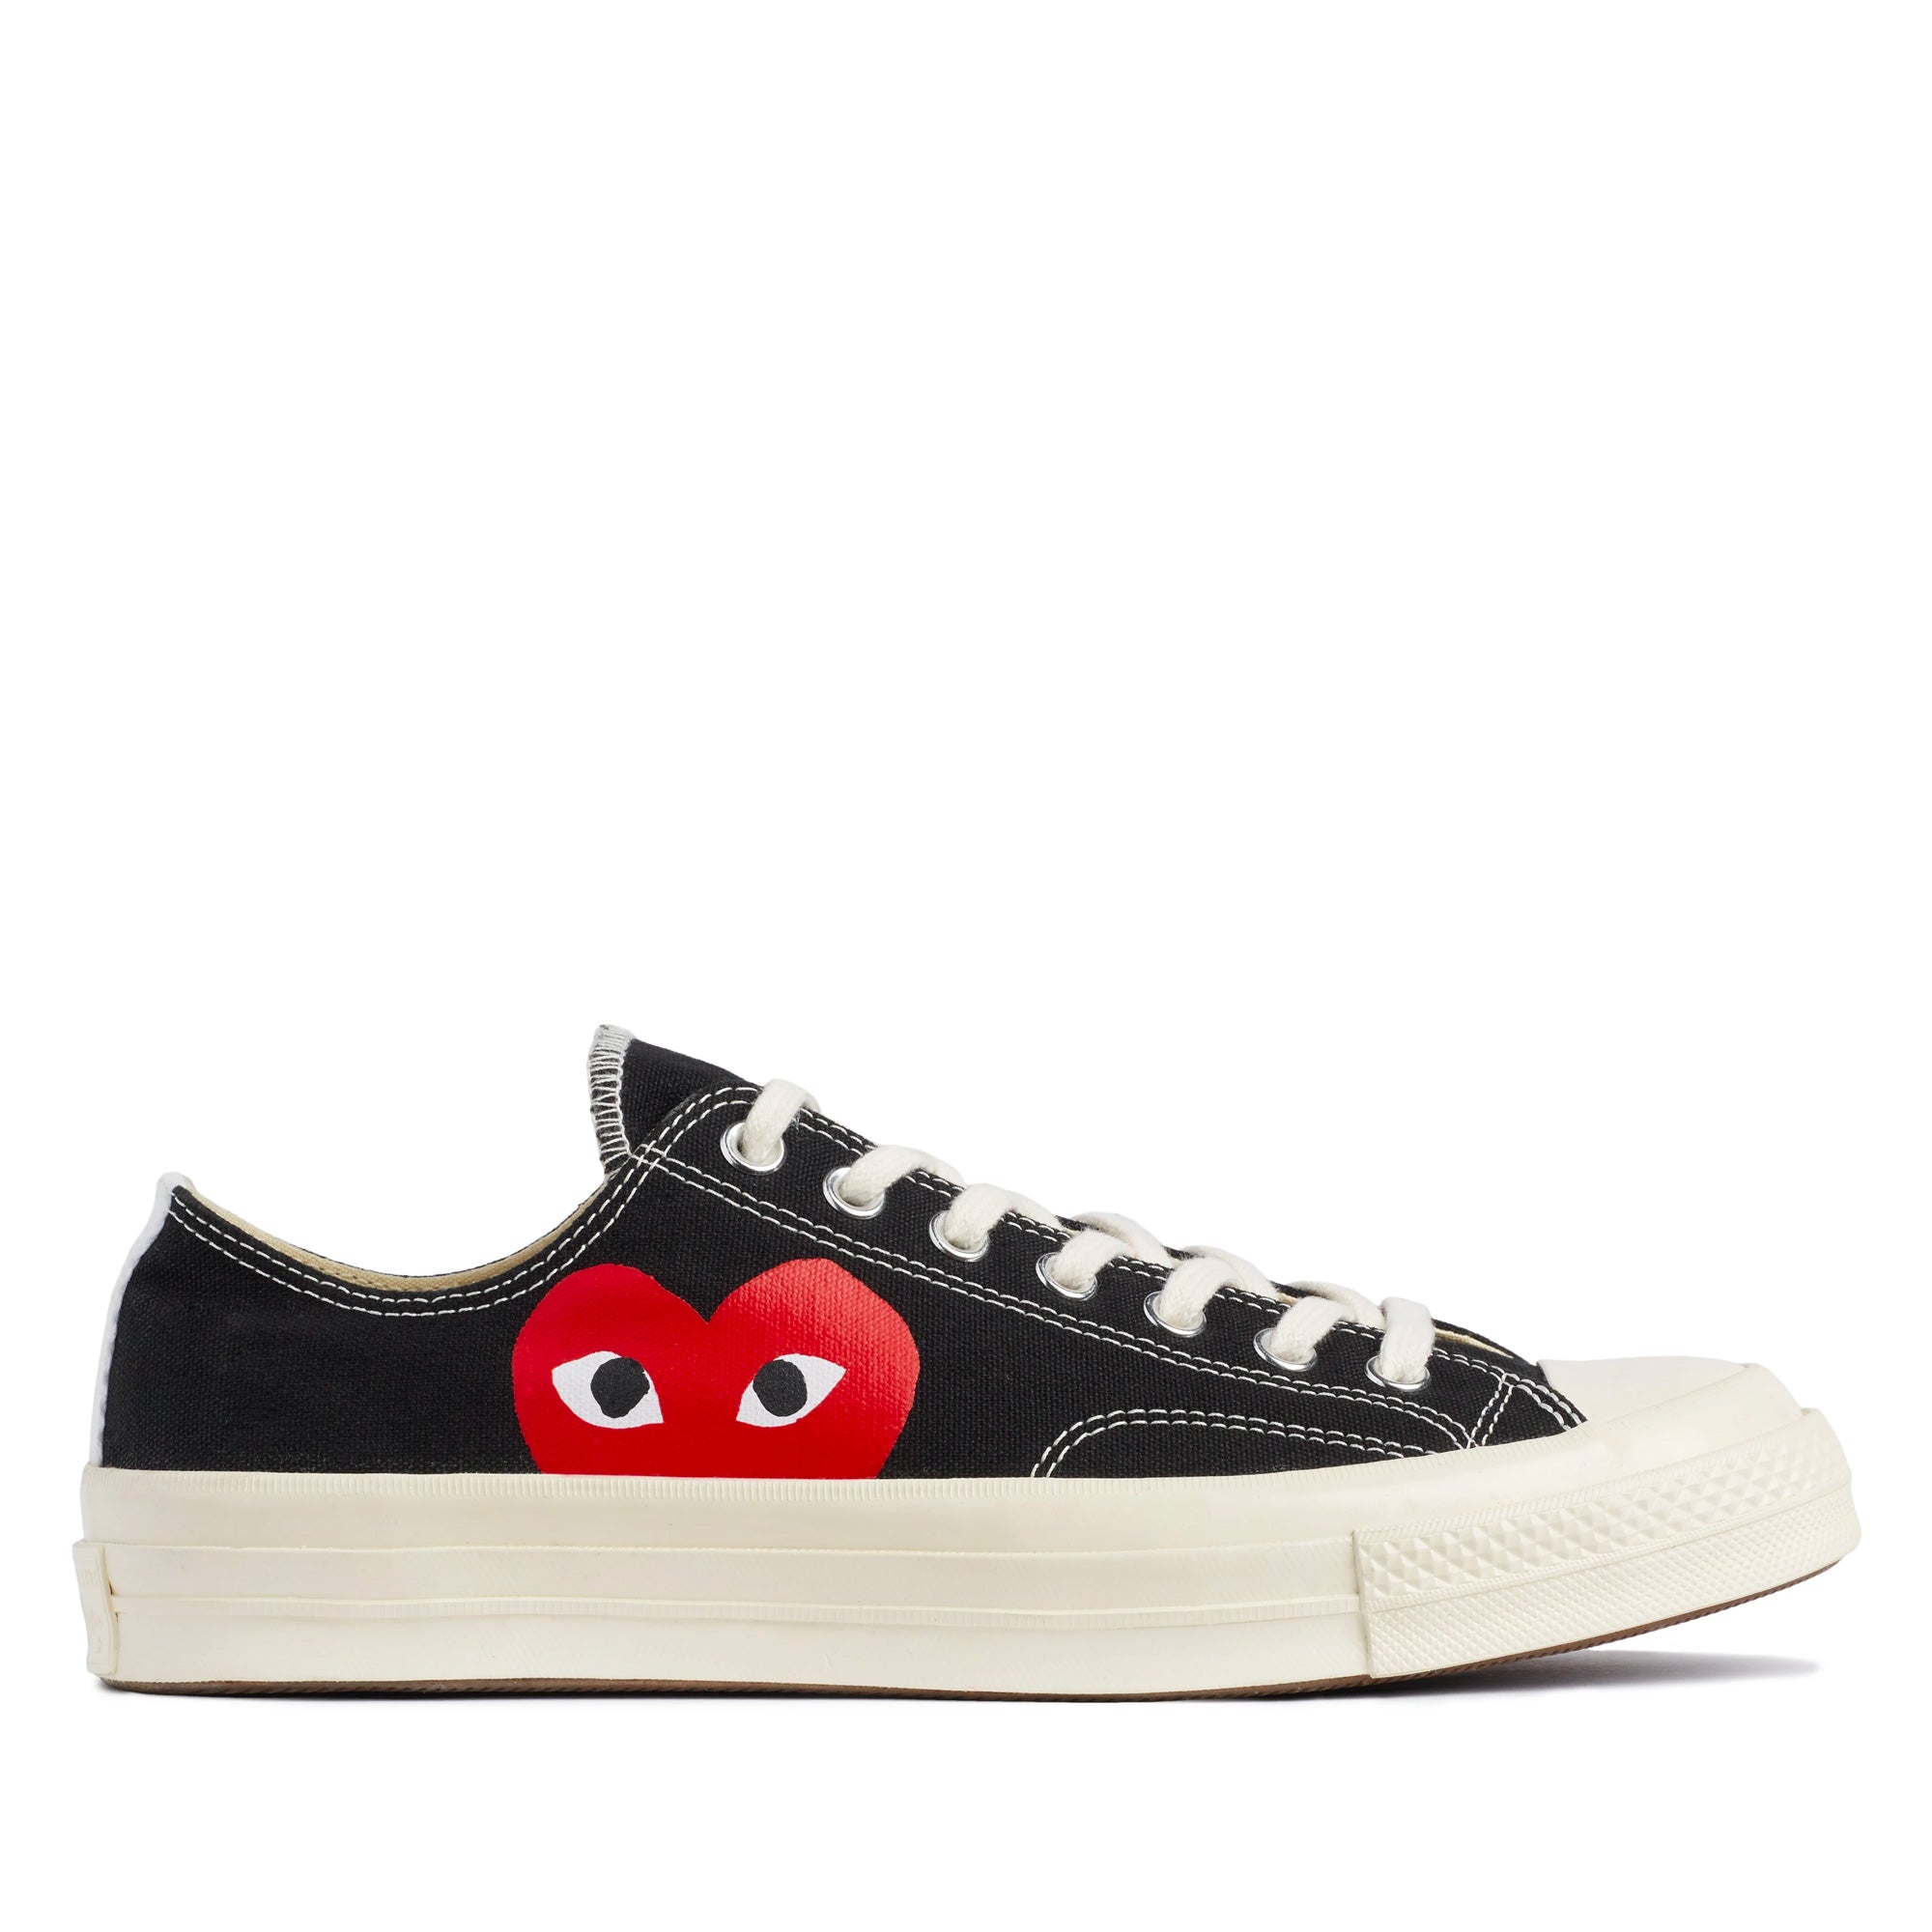 Play Converse - Red Heart Chuck Taylor All Star ’70 Low Sneakers - (Black) view 1